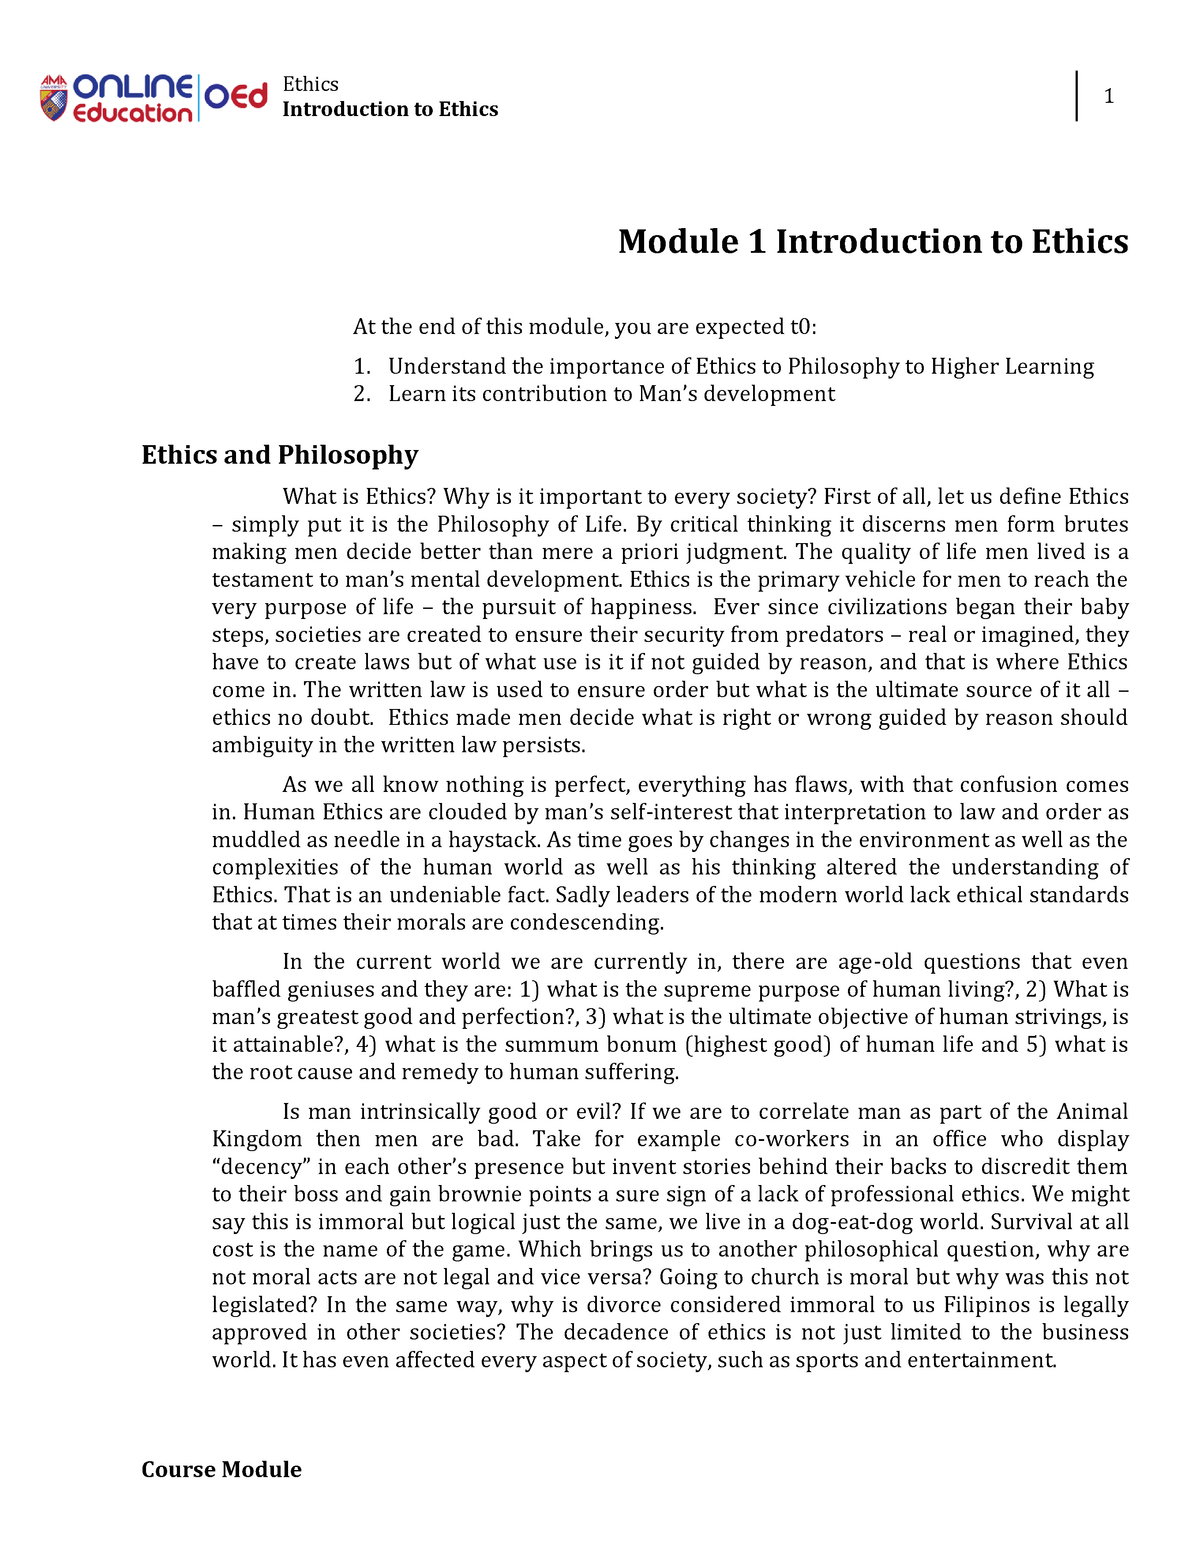 business ethics paper introduction